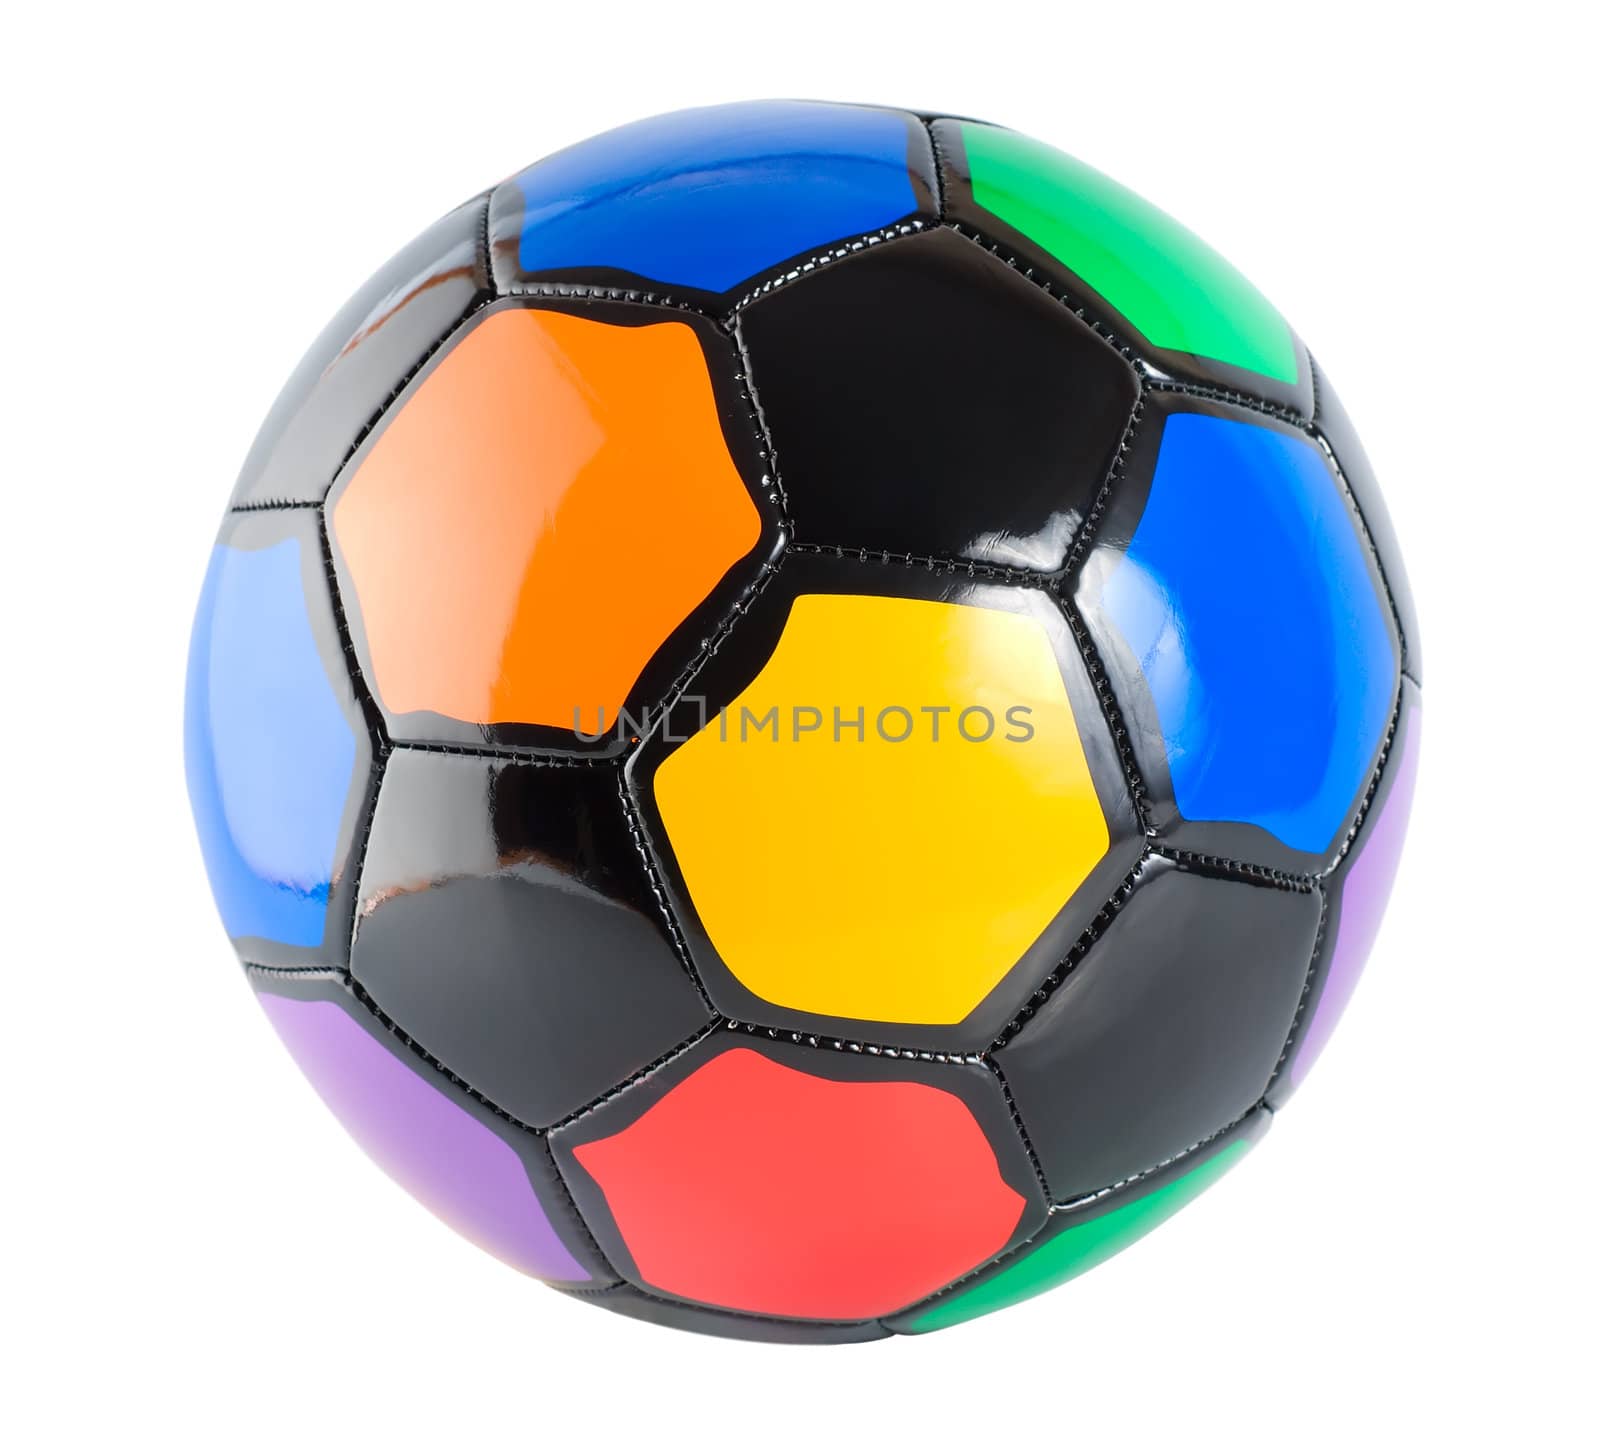 Soccer ball by Givaga